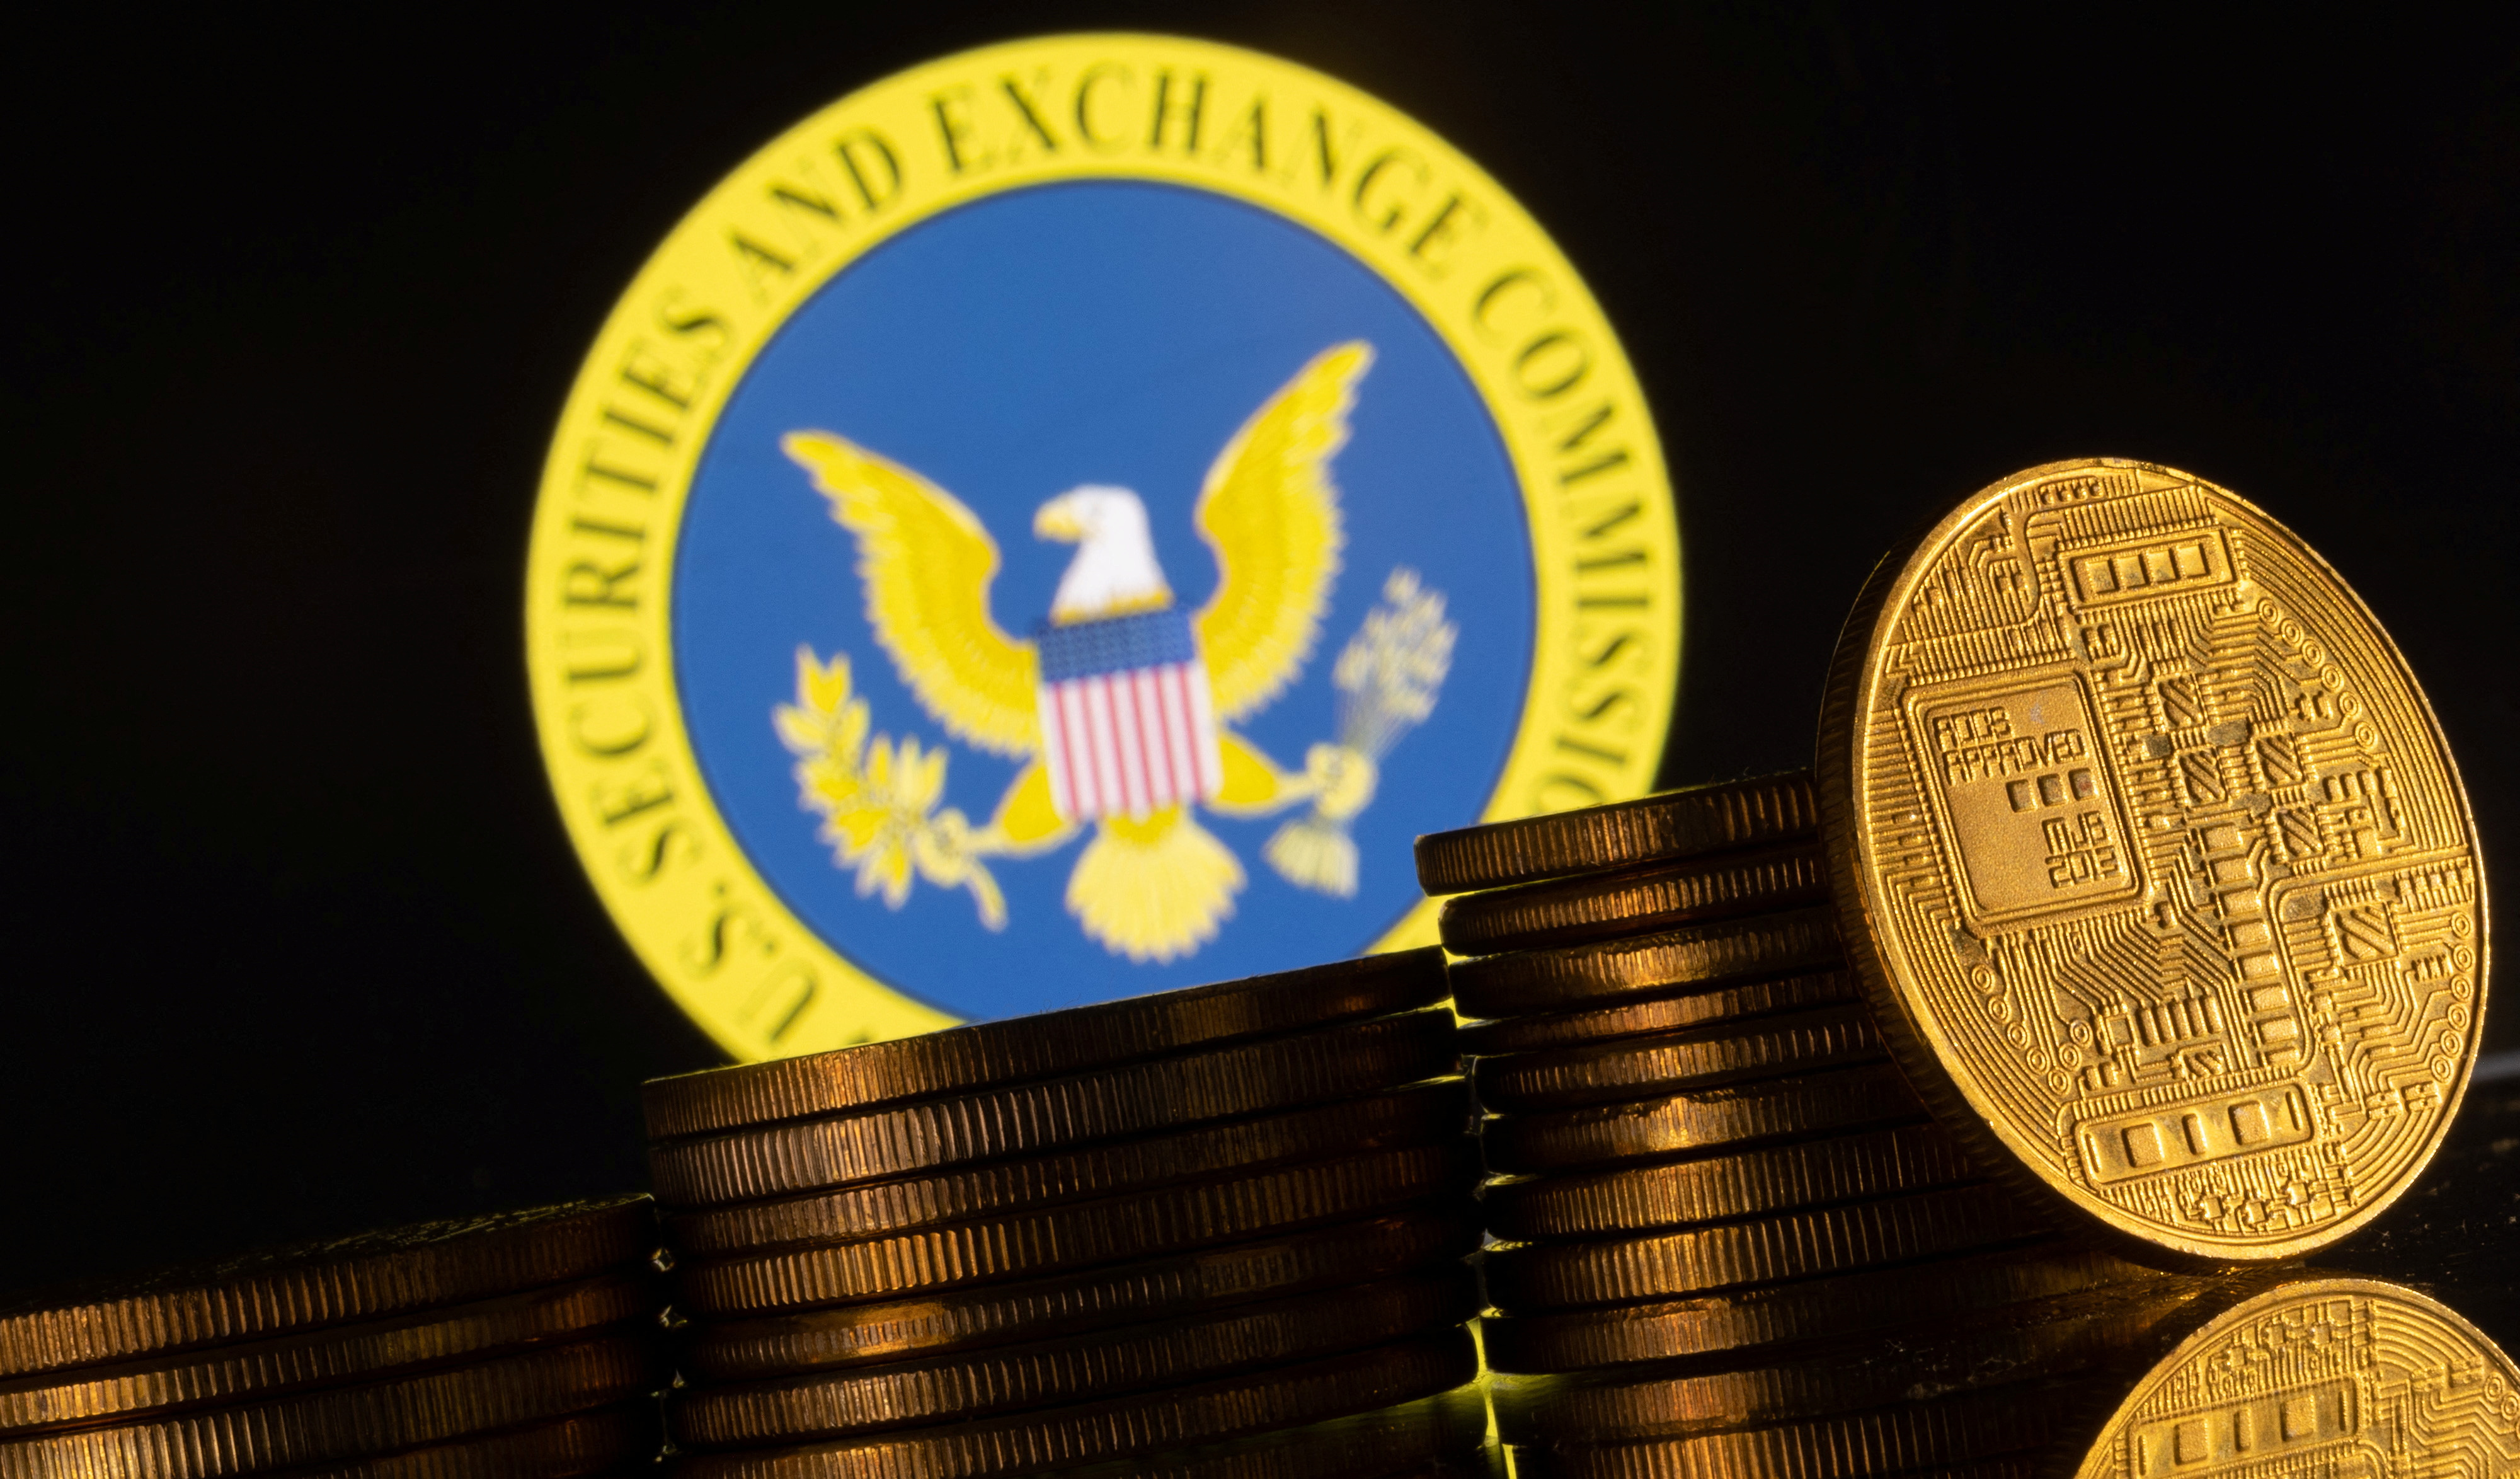 Illustration shows U.S. Securities and Exchange Commission logo and representations of cryptocurrency